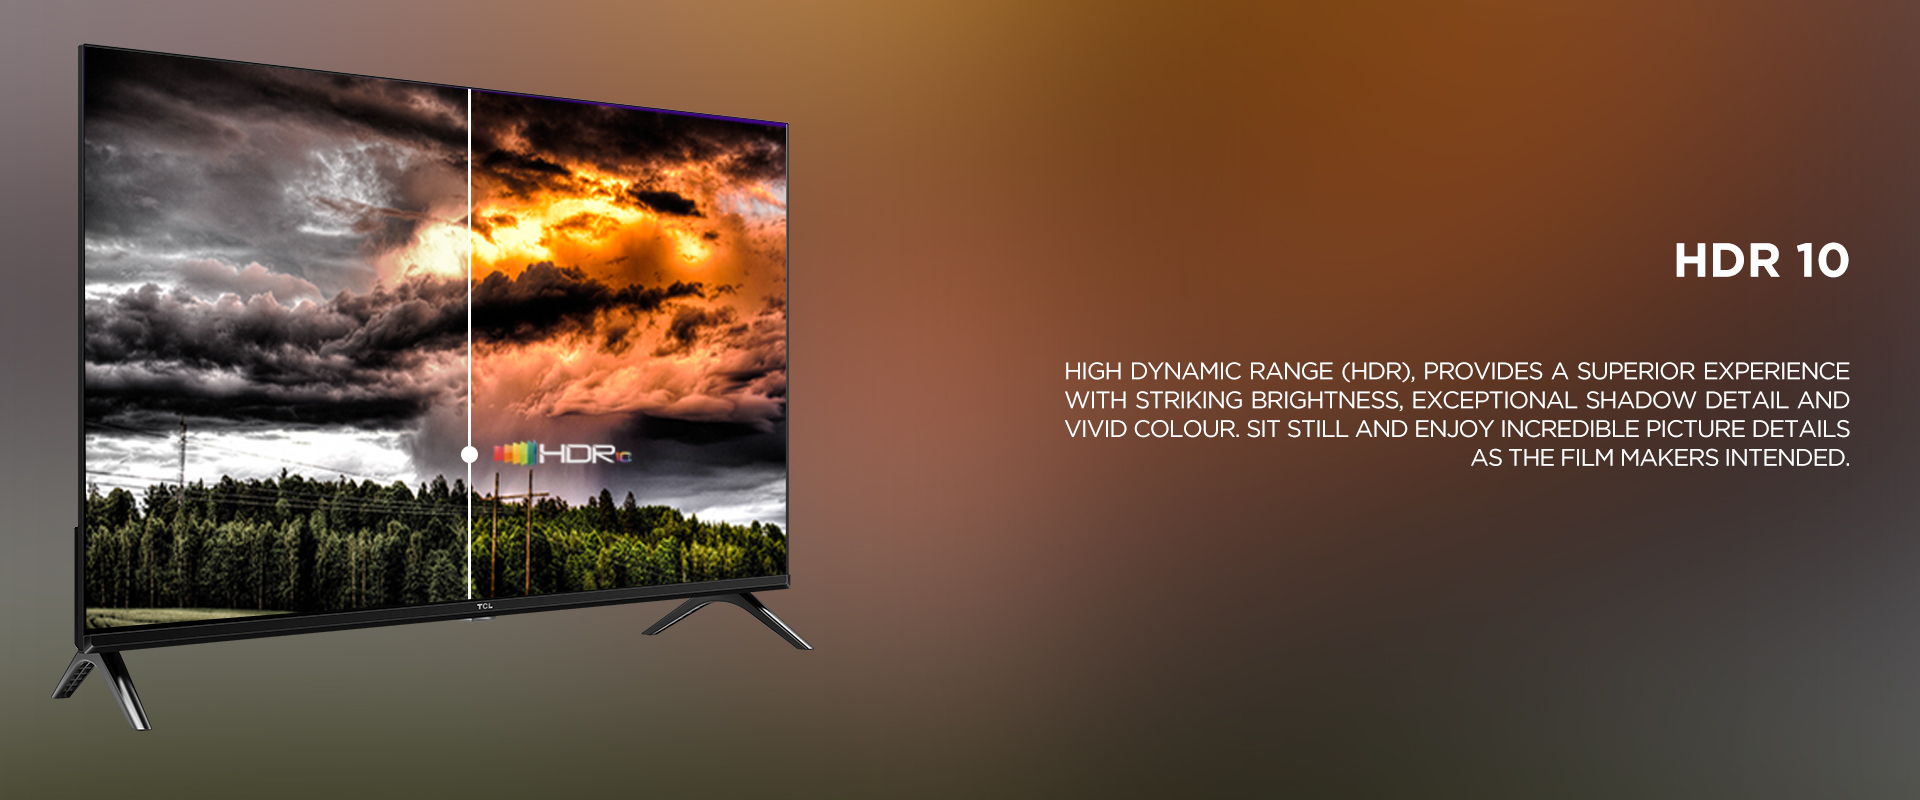 HDR 10 - high dynamic range (HDR), provides a superior experience with striking brightness, exceptional shadow detail and vivid colour. Sit still and enjoy incredible picture details as the film makers intended.